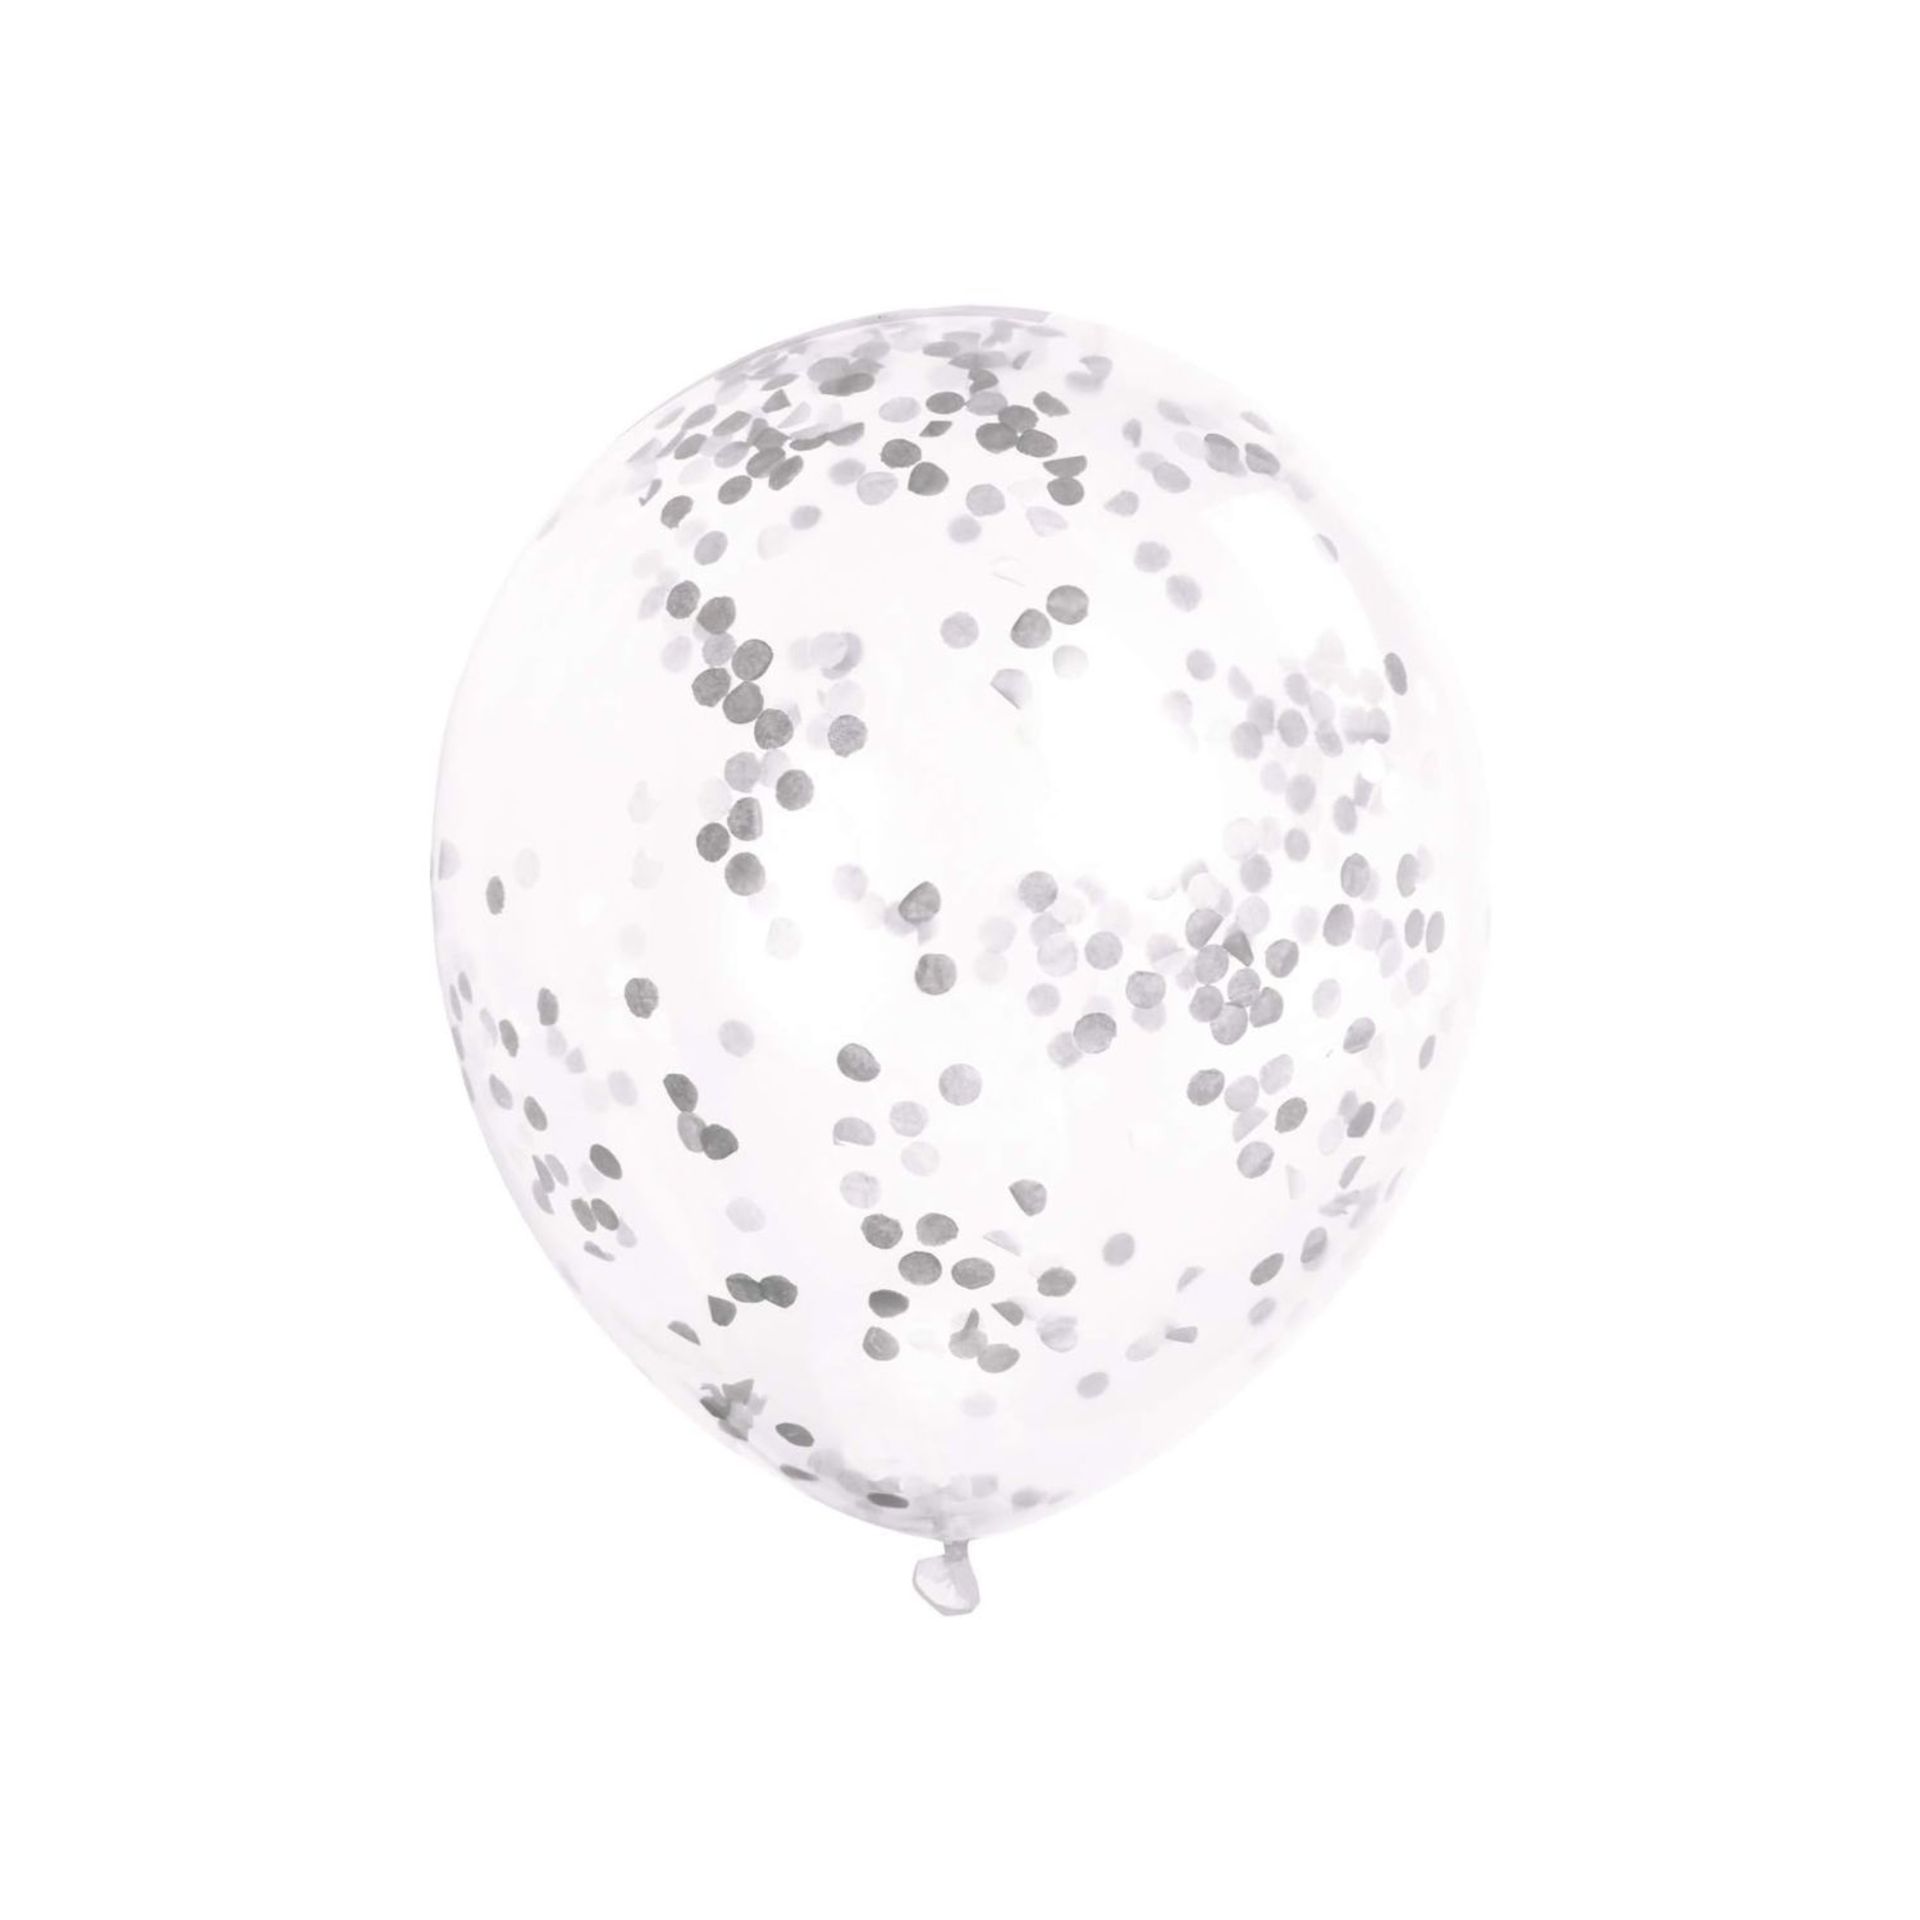 1000 PACKS OF LATEX SILVER AND GOLD CONFETTI BALLOONS, 12IN, 6CT, RRP £10,000 - Image 6 of 7